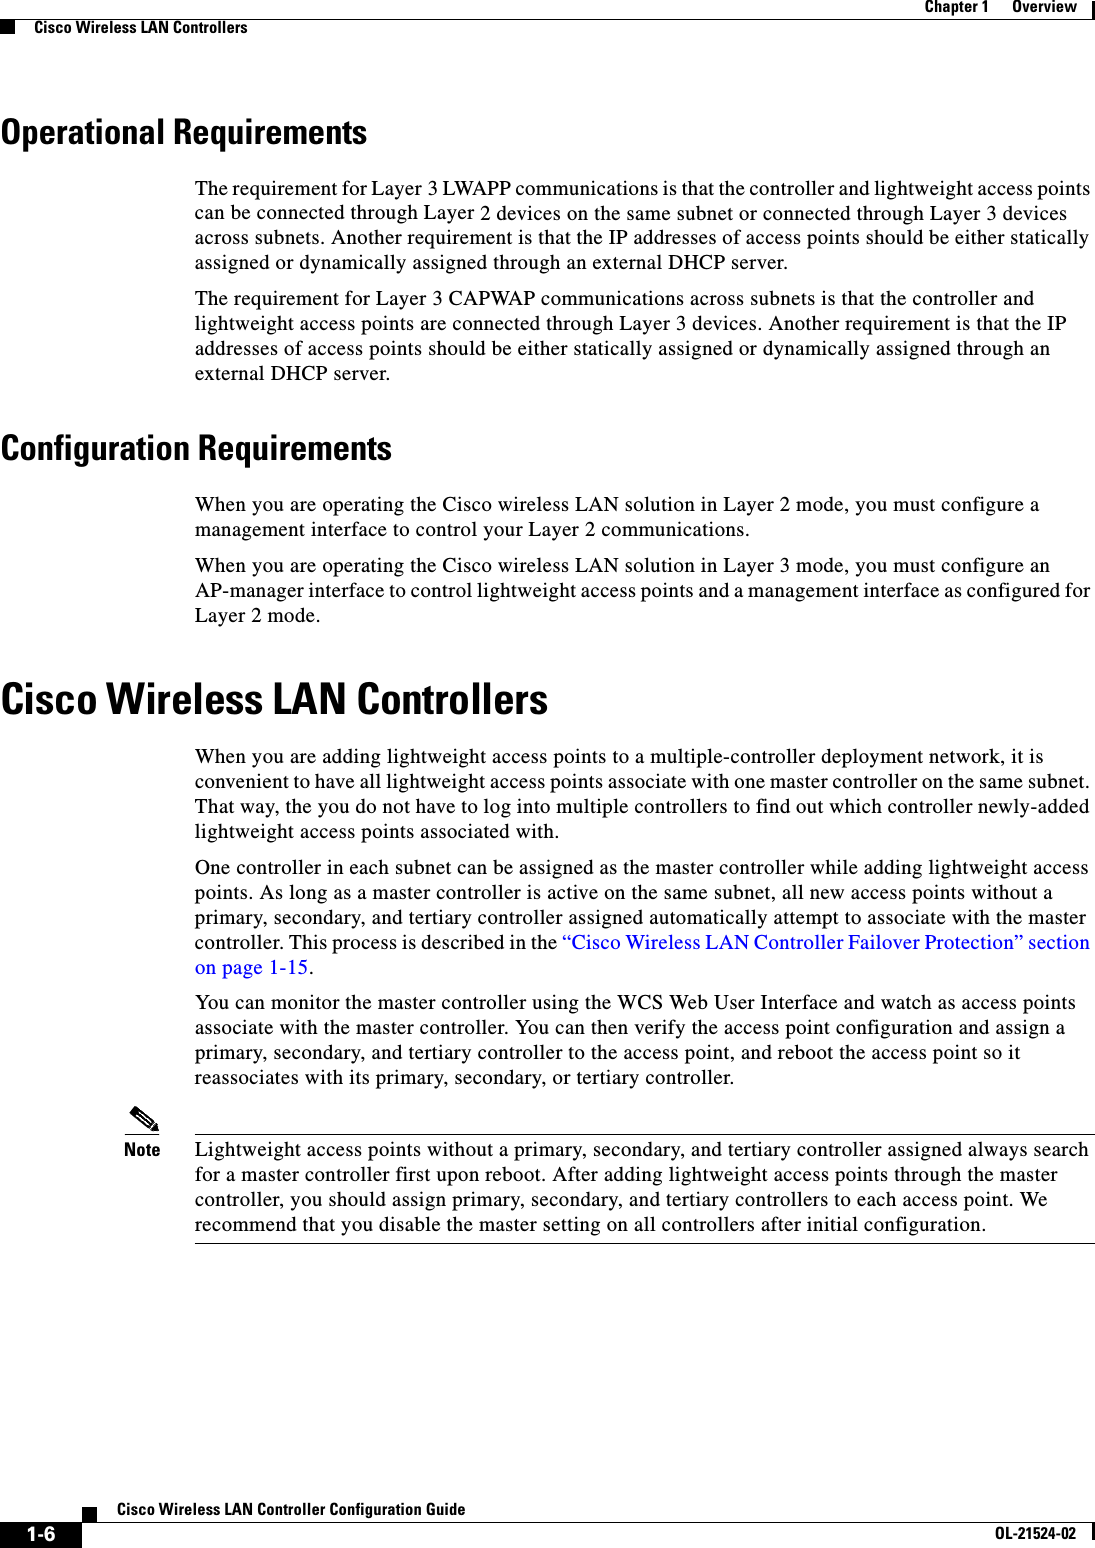  1-6Cisco Wireless LAN Controller Configuration GuideOL-21524-02Chapter 1      OverviewCisco Wireless LAN ControllersOperational RequirementsThe requirement for Layer 3 LWAPP communications is that the controller and lightweight access points can be connected through Layer 2 devices on the same subnet or connected through Layer 3 devices across subnets. Another requirement is that the IP addresses of access points should be either statically assigned or dynamically assigned through an external DHCP server.The requirement for Layer 3 CAPWAP communications across subnets is that the controller and lightweight access points are connected through Layer 3 devices. Another requirement is that the IP addresses of access points should be either statically assigned or dynamically assigned through an external DHCP server.Configuration RequirementsWhen you are operating the Cisco wireless LAN solution in Layer 2 mode, you must configure a management interface to control your Layer 2 communications. When you are operating the Cisco wireless LAN solution in Layer 3 mode, you must configure an AP-manager interface to control lightweight access points and a management interface as configured for Layer 2 mode. Cisco Wireless LAN ControllersWhen you are adding lightweight access points to a multiple-controller deployment network, it is convenient to have all lightweight access points associate with one master controller on the same subnet. That way, the you do not have to log into multiple controllers to find out which controller newly-added lightweight access points associated with.One controller in each subnet can be assigned as the master controller while adding lightweight access points. As long as a master controller is active on the same subnet, all new access points without a primary, secondary, and tertiary controller assigned automatically attempt to associate with the master controller. This process is described in the “Cisco Wireless LAN Controller Failover Protection” section on page 1-15. You can monitor the master controller using the WCS Web User Interface and watch as access points associate with the master controller. You can then verify the access point configuration and assign a primary, secondary, and tertiary controller to the access point, and reboot the access point so it reassociates with its primary, secondary, or tertiary controller.Note Lightweight access points without a primary, secondary, and tertiary controller assigned always search for a master controller first upon reboot. After adding lightweight access points through the master controller, you should assign primary, secondary, and tertiary controllers to each access point. We recommend that you disable the master setting on all controllers after initial configuration. 